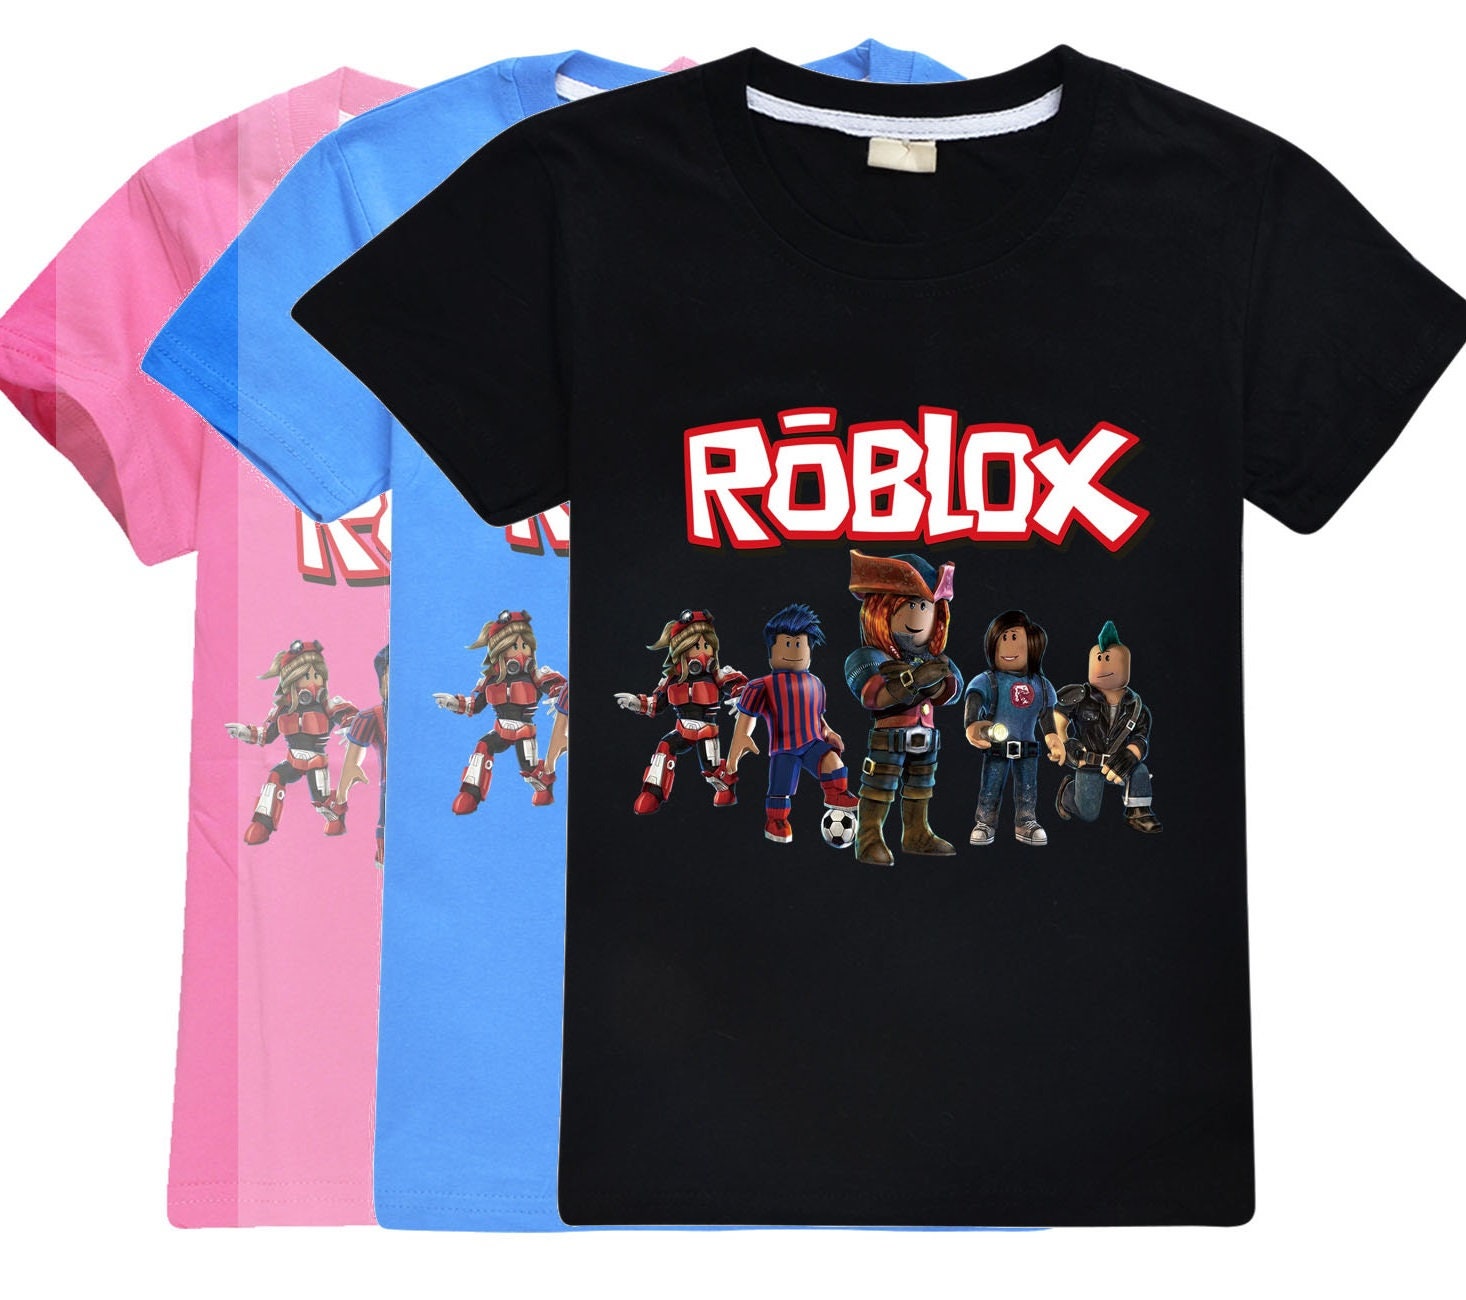 One Of My Favorite Shirts - Shirt Clothing Template Roblox